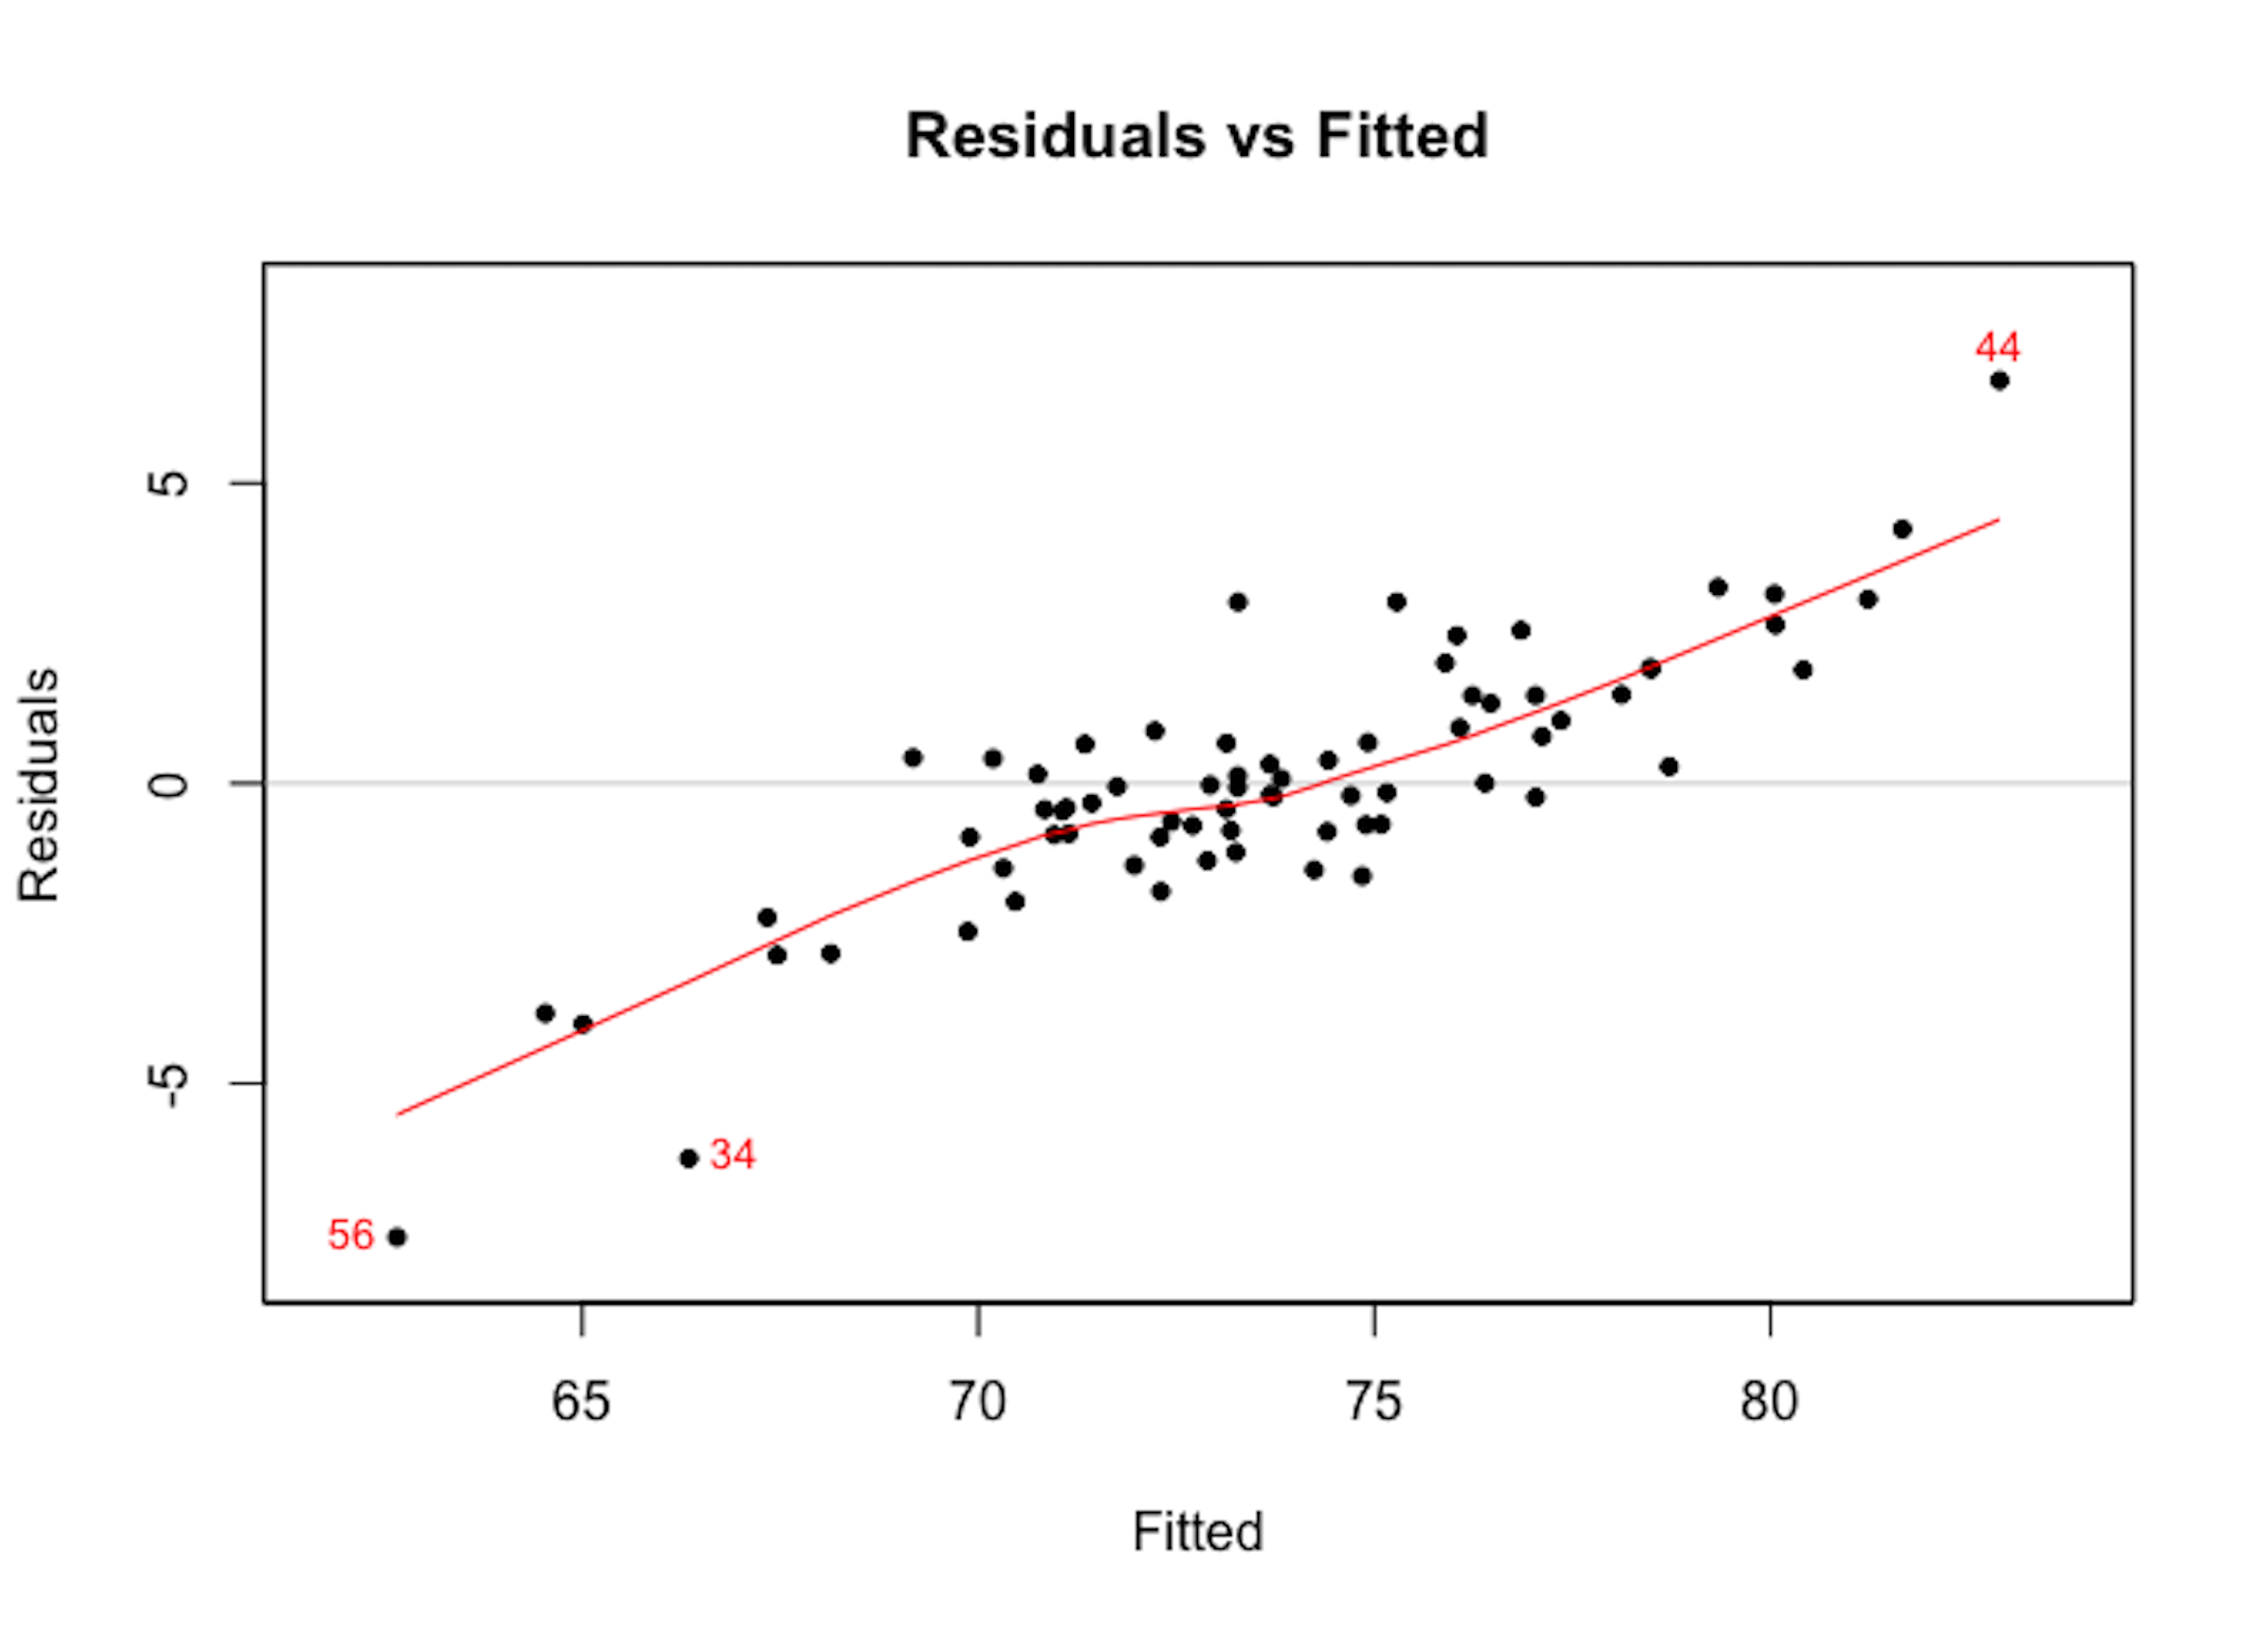 Residuals versus fitted in the random forest model